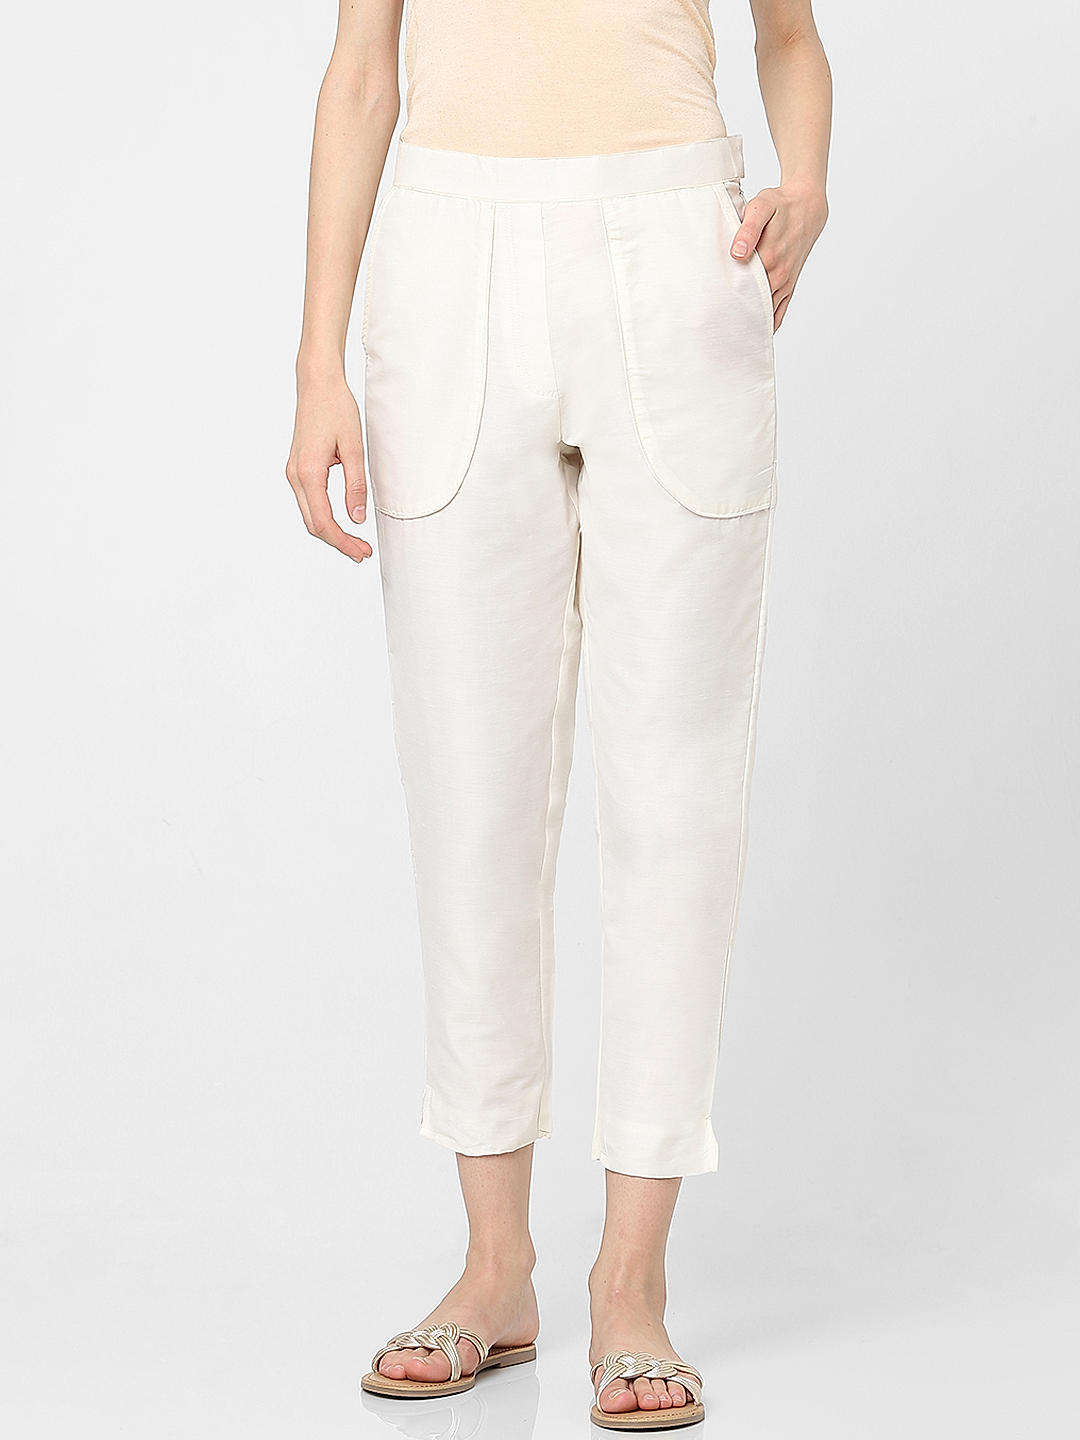 Republic Of Curves  Off White Formal Pants  Straight Pants  Office Pants   Women